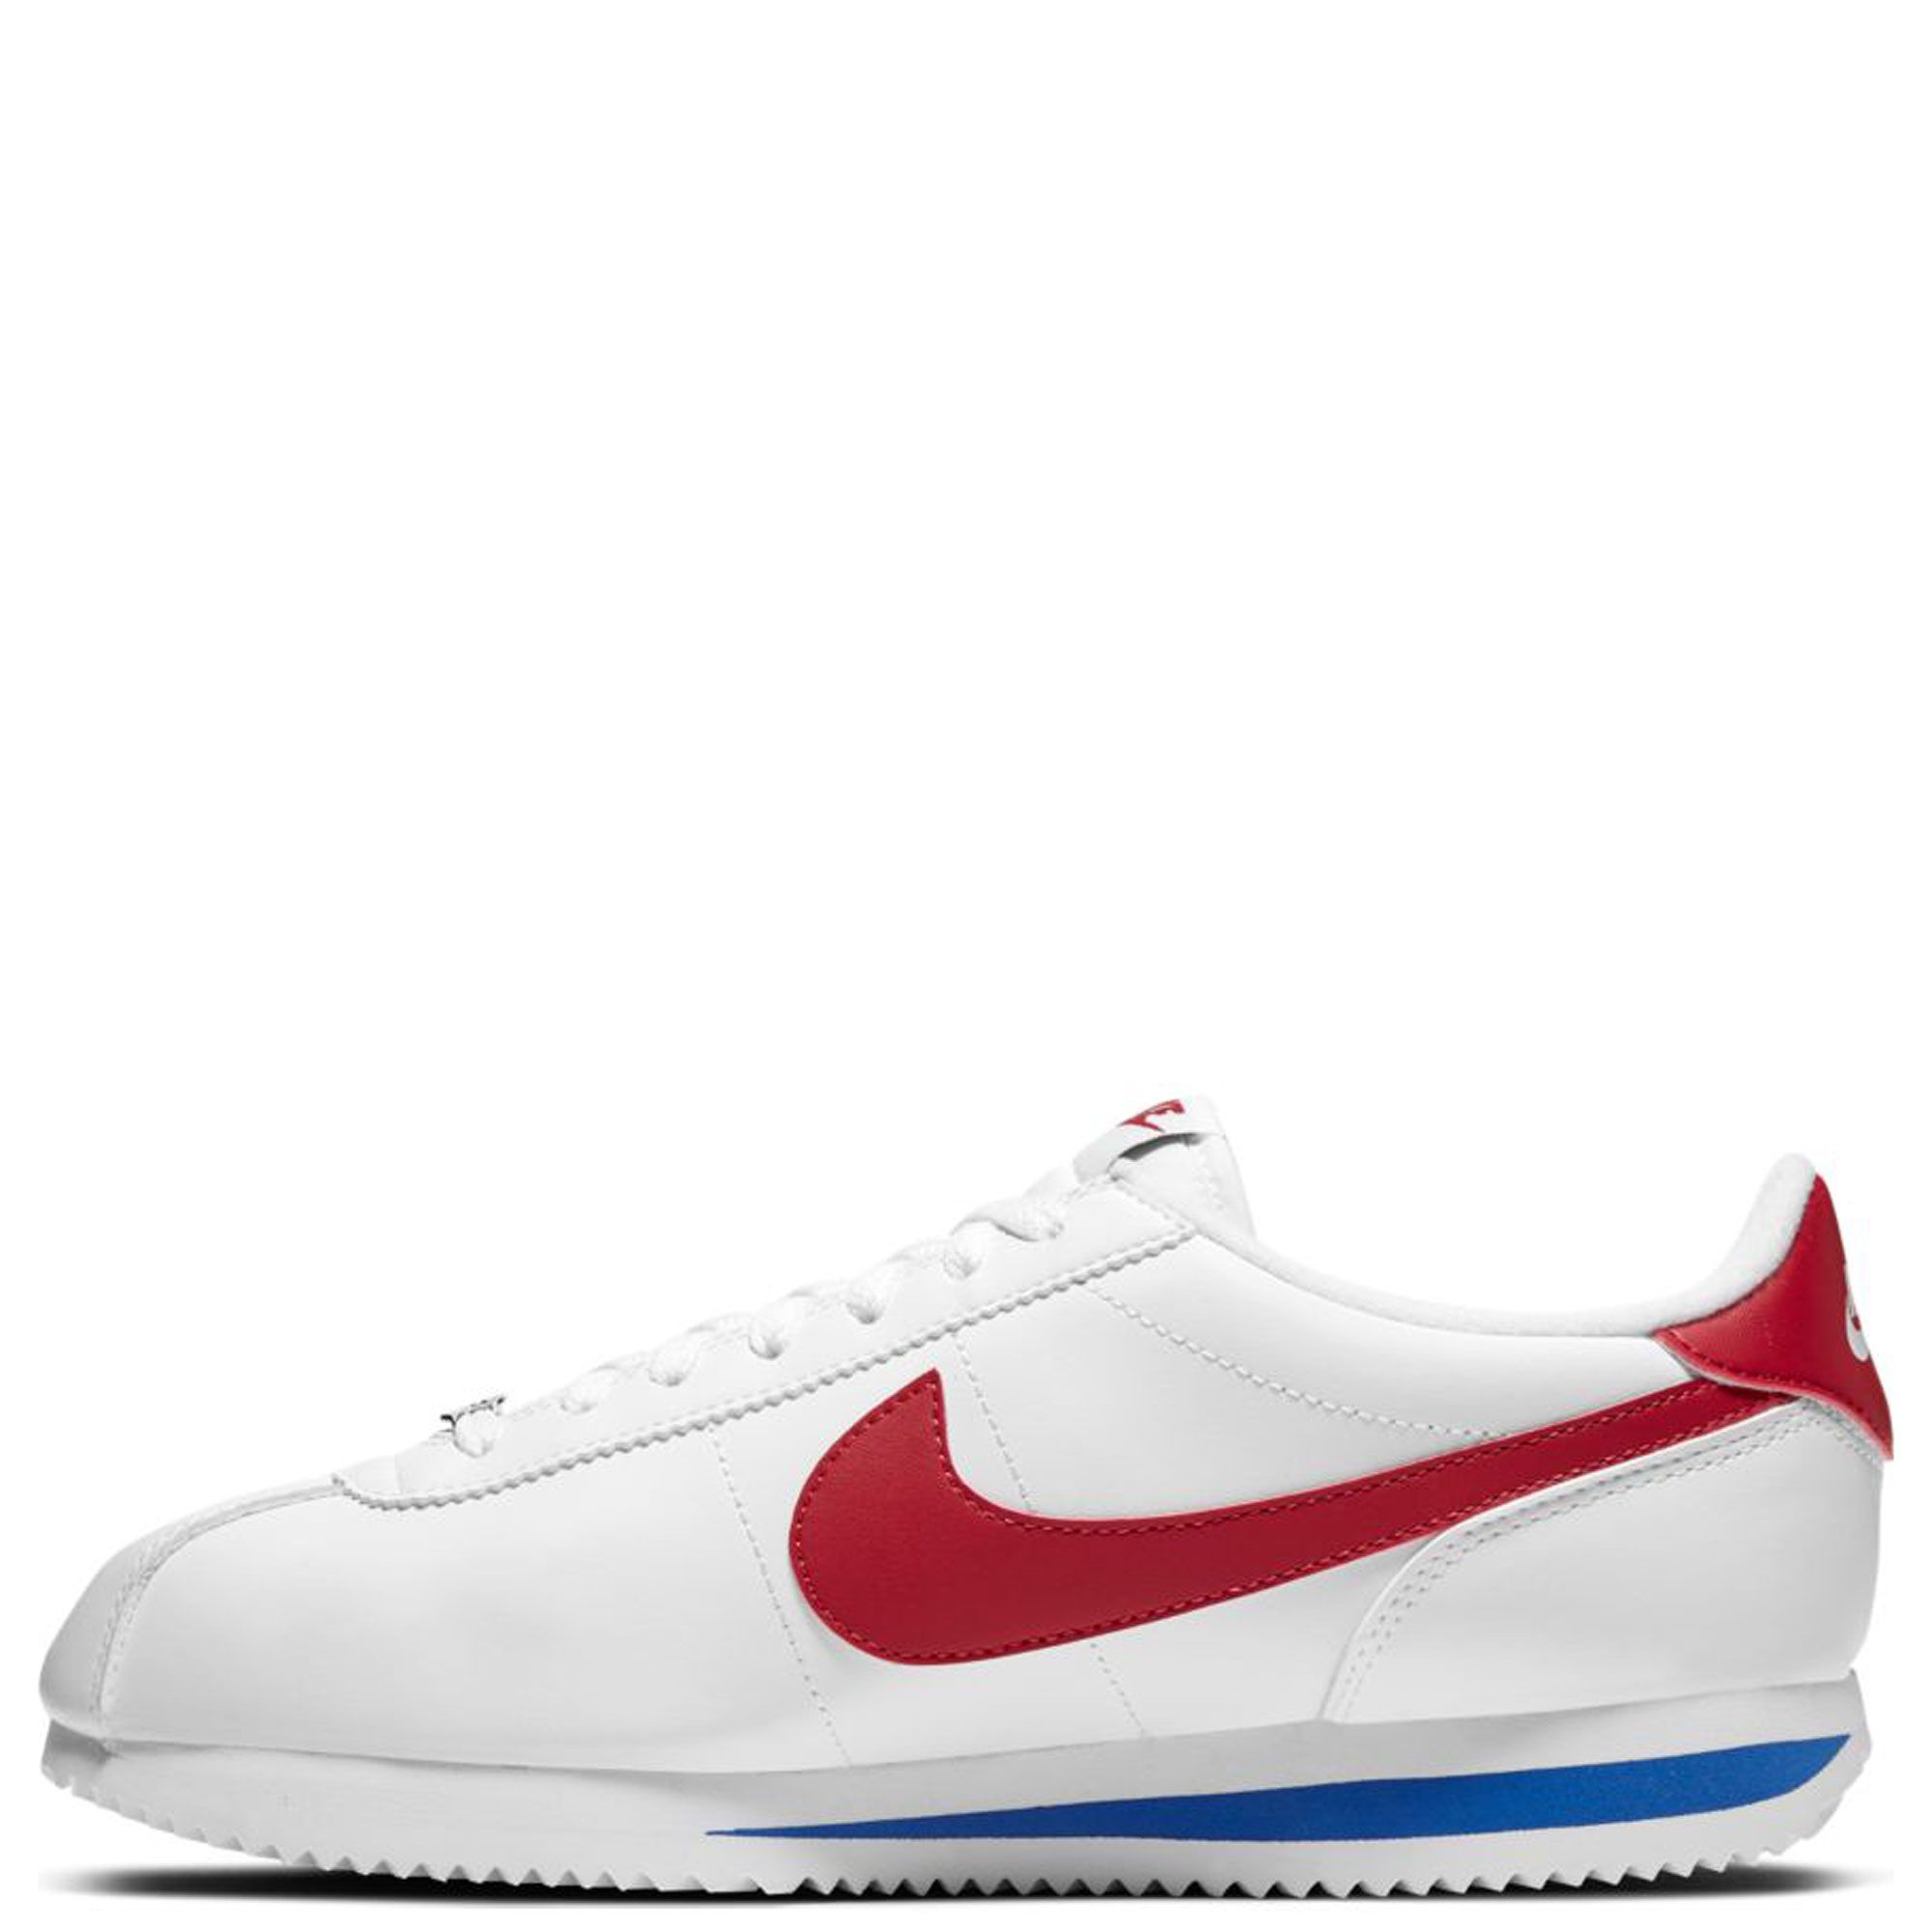 red leather cortez